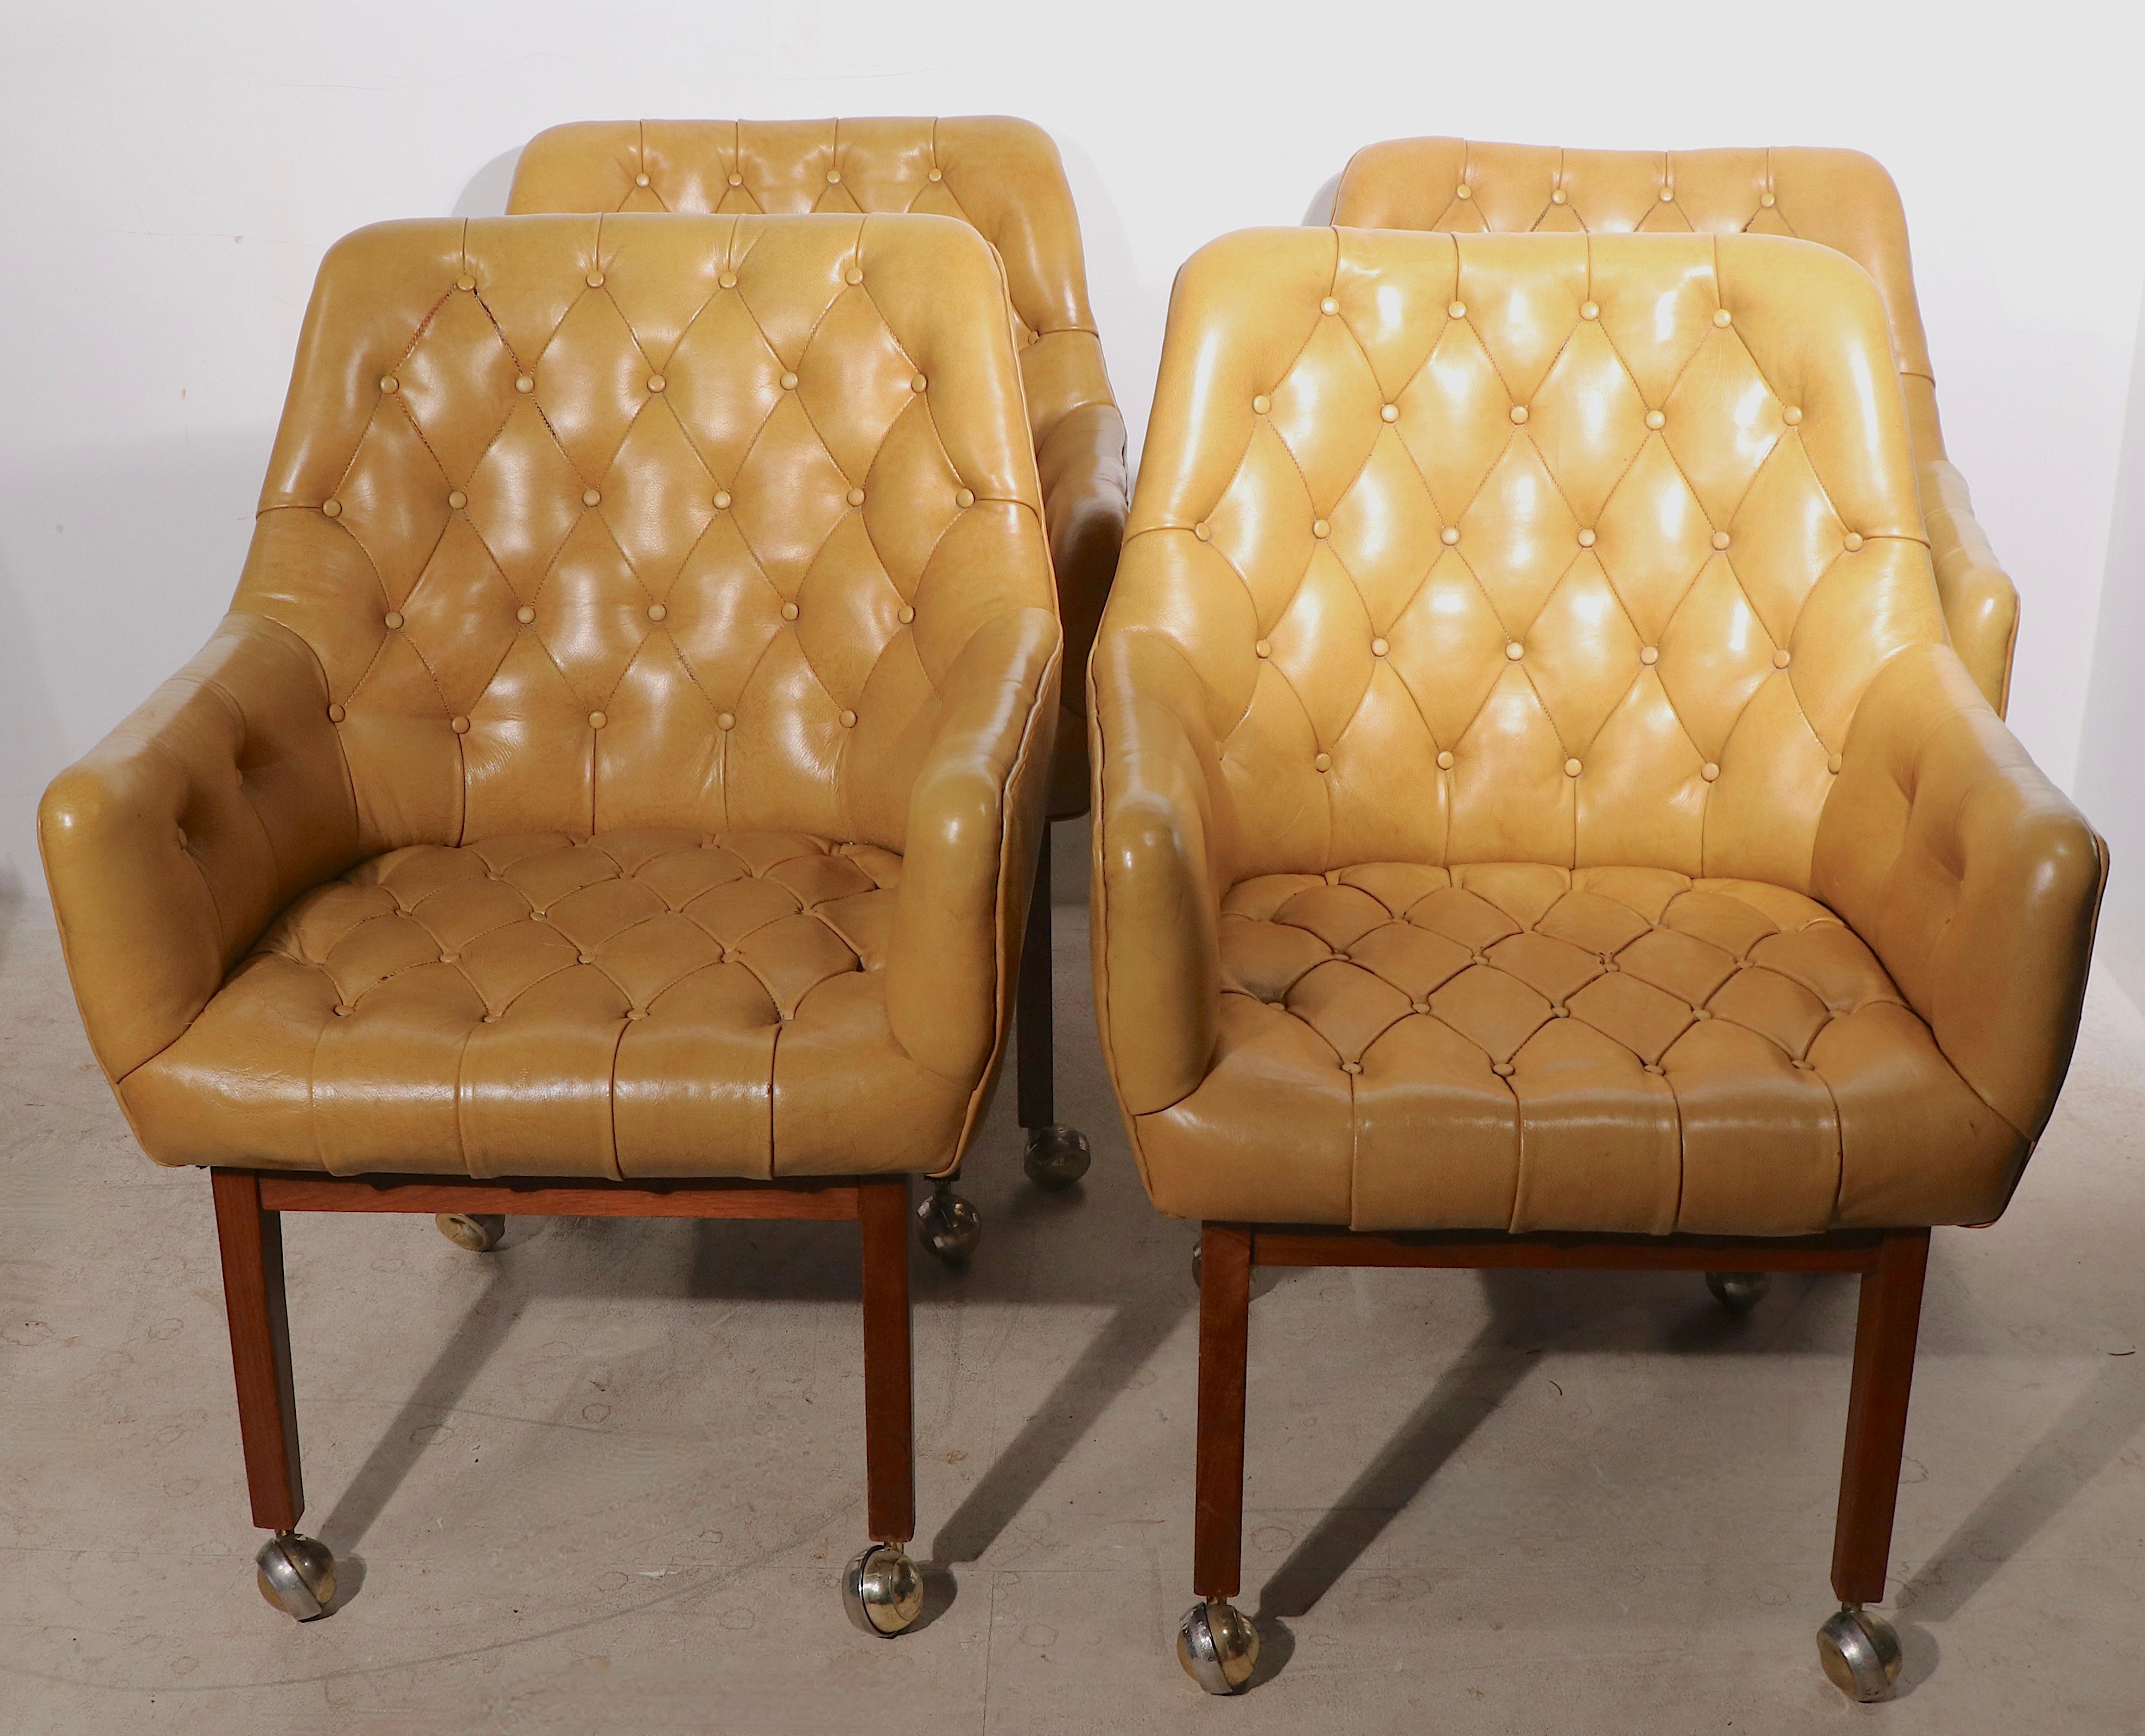 Chic suite if four tufted leather tub chairs. y noted furniture maker B. L. Marble. The chairs have a leather bucket type seat, which is supported by a solid wood base, and legs, on original ball coaster feet. All are structurally sound and sturdy,